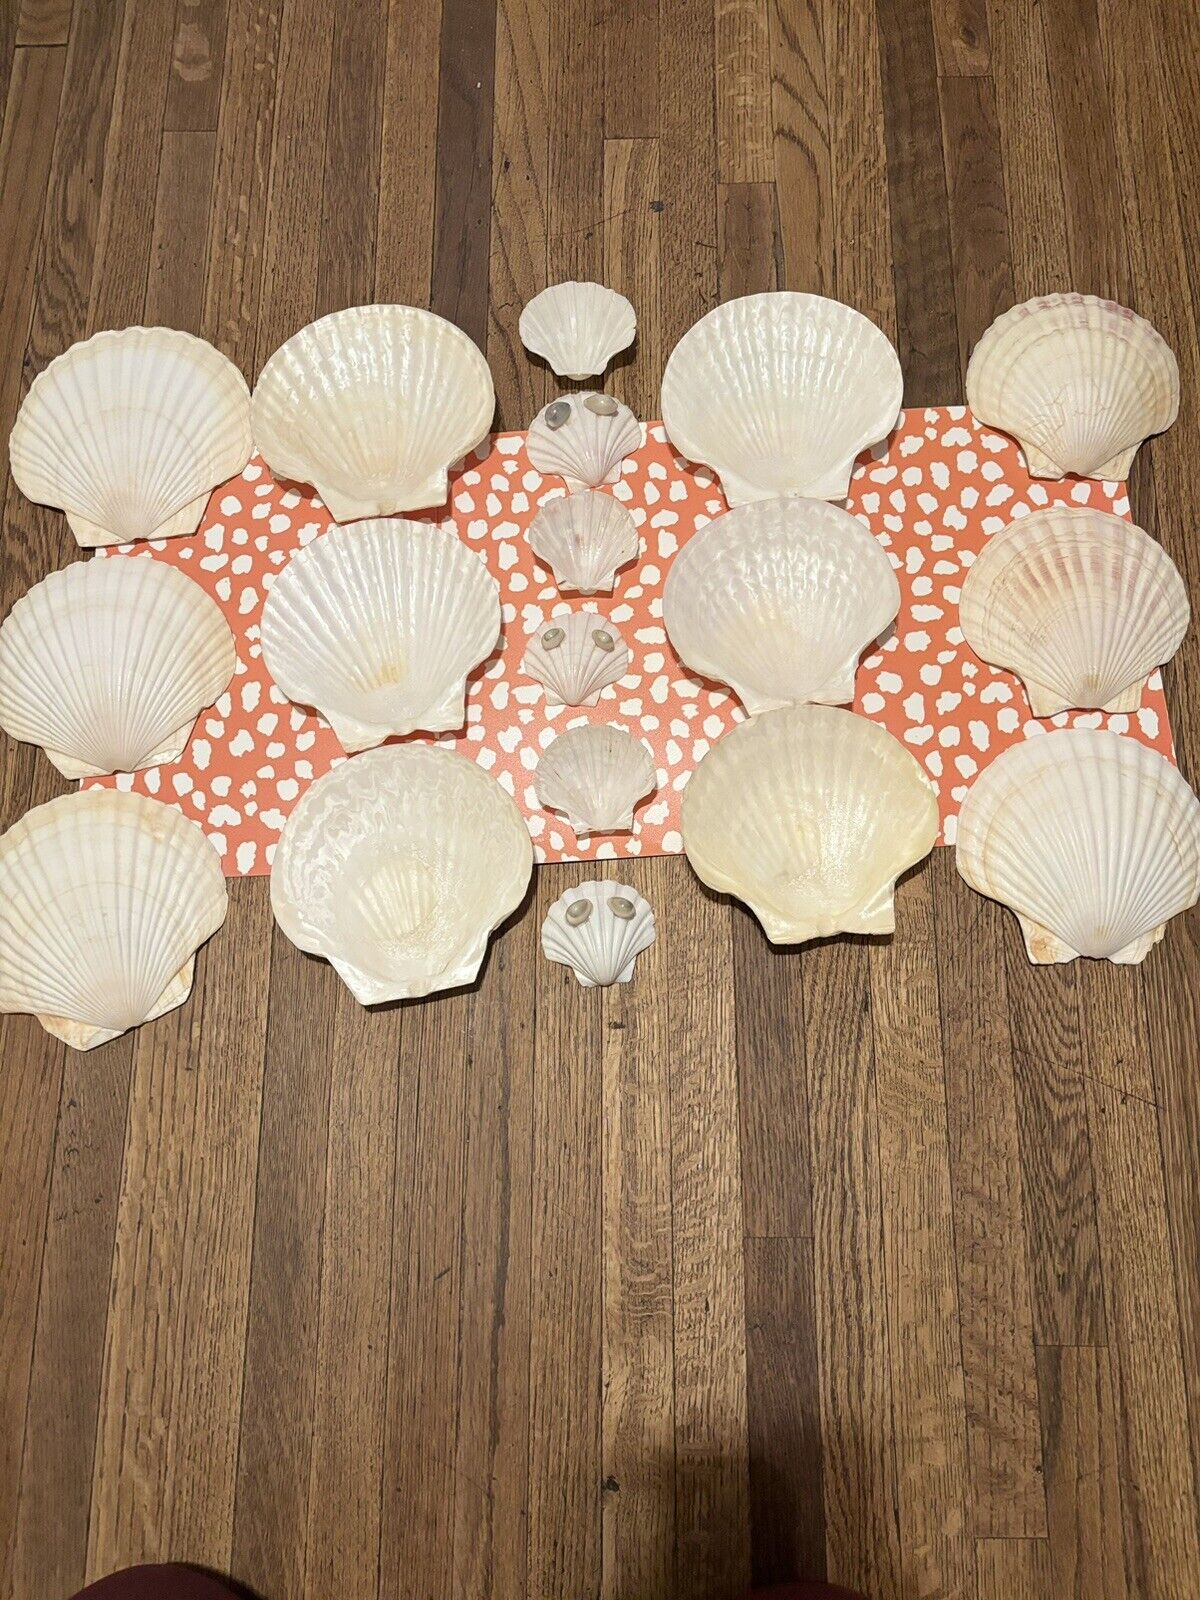 18 Piece Vintage Seashell Baking/Serving Dishes